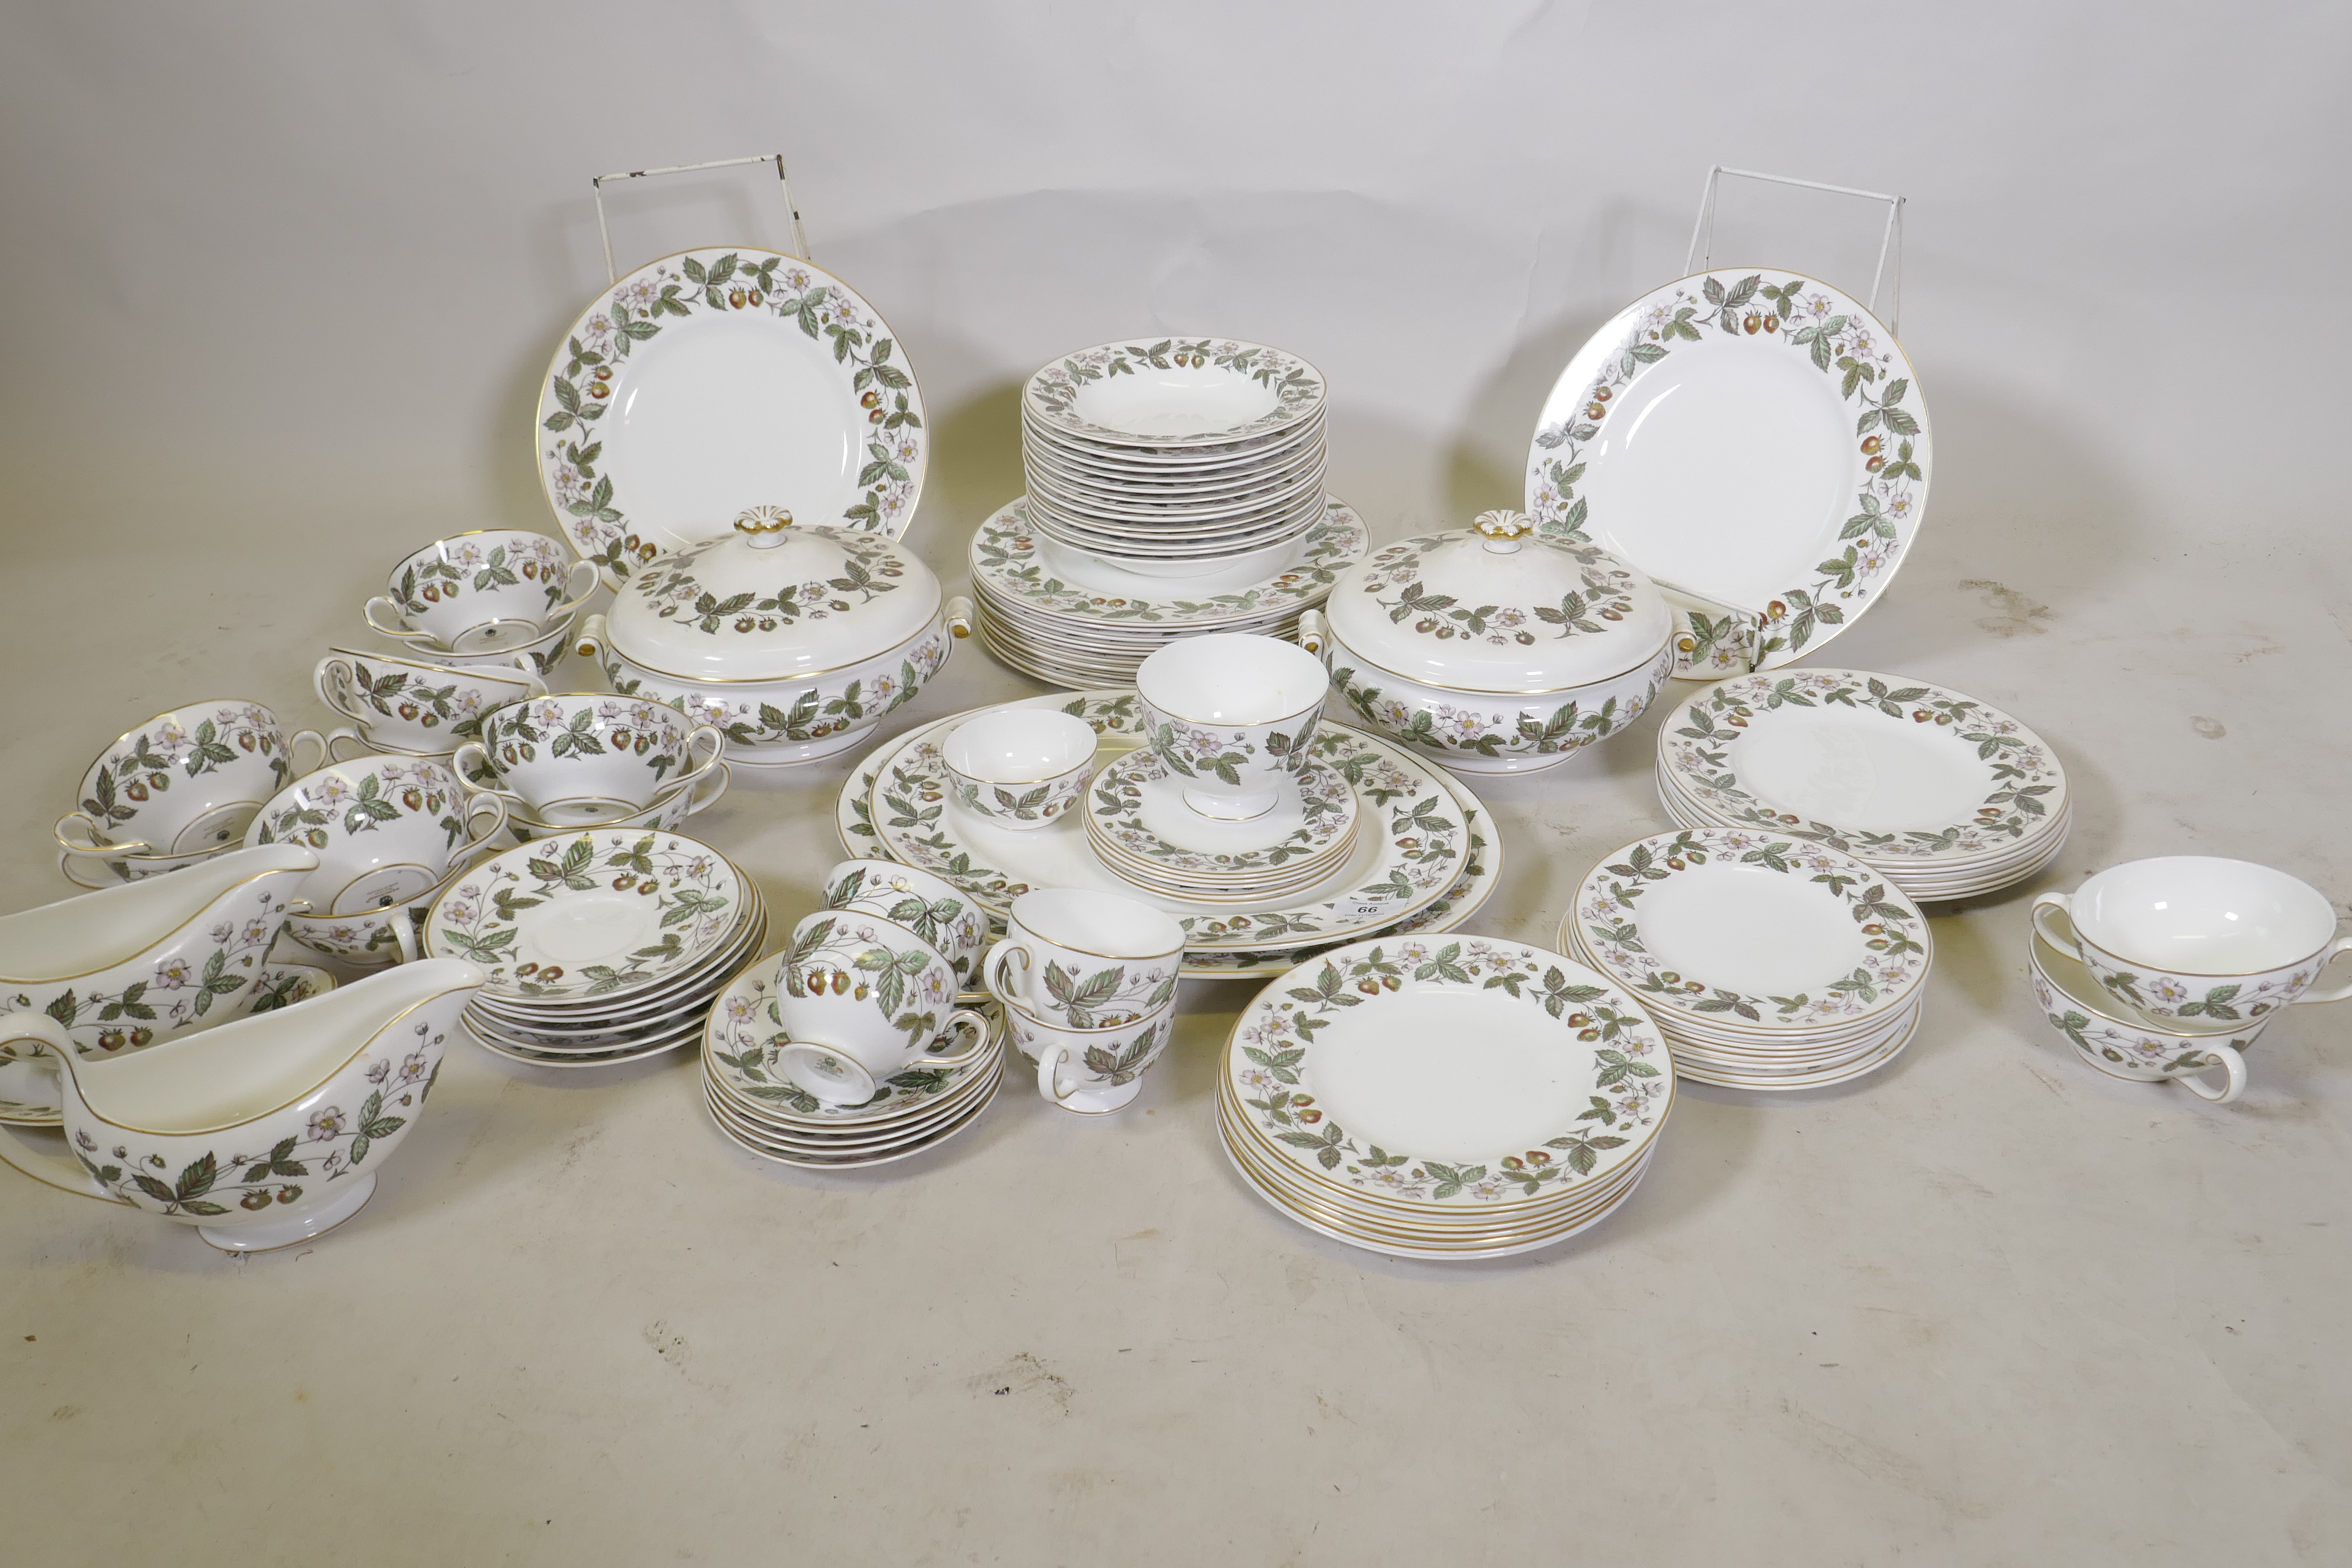 A Wedgwood 'Strawberry Hill' pattern part dinner service, (different backstamps)